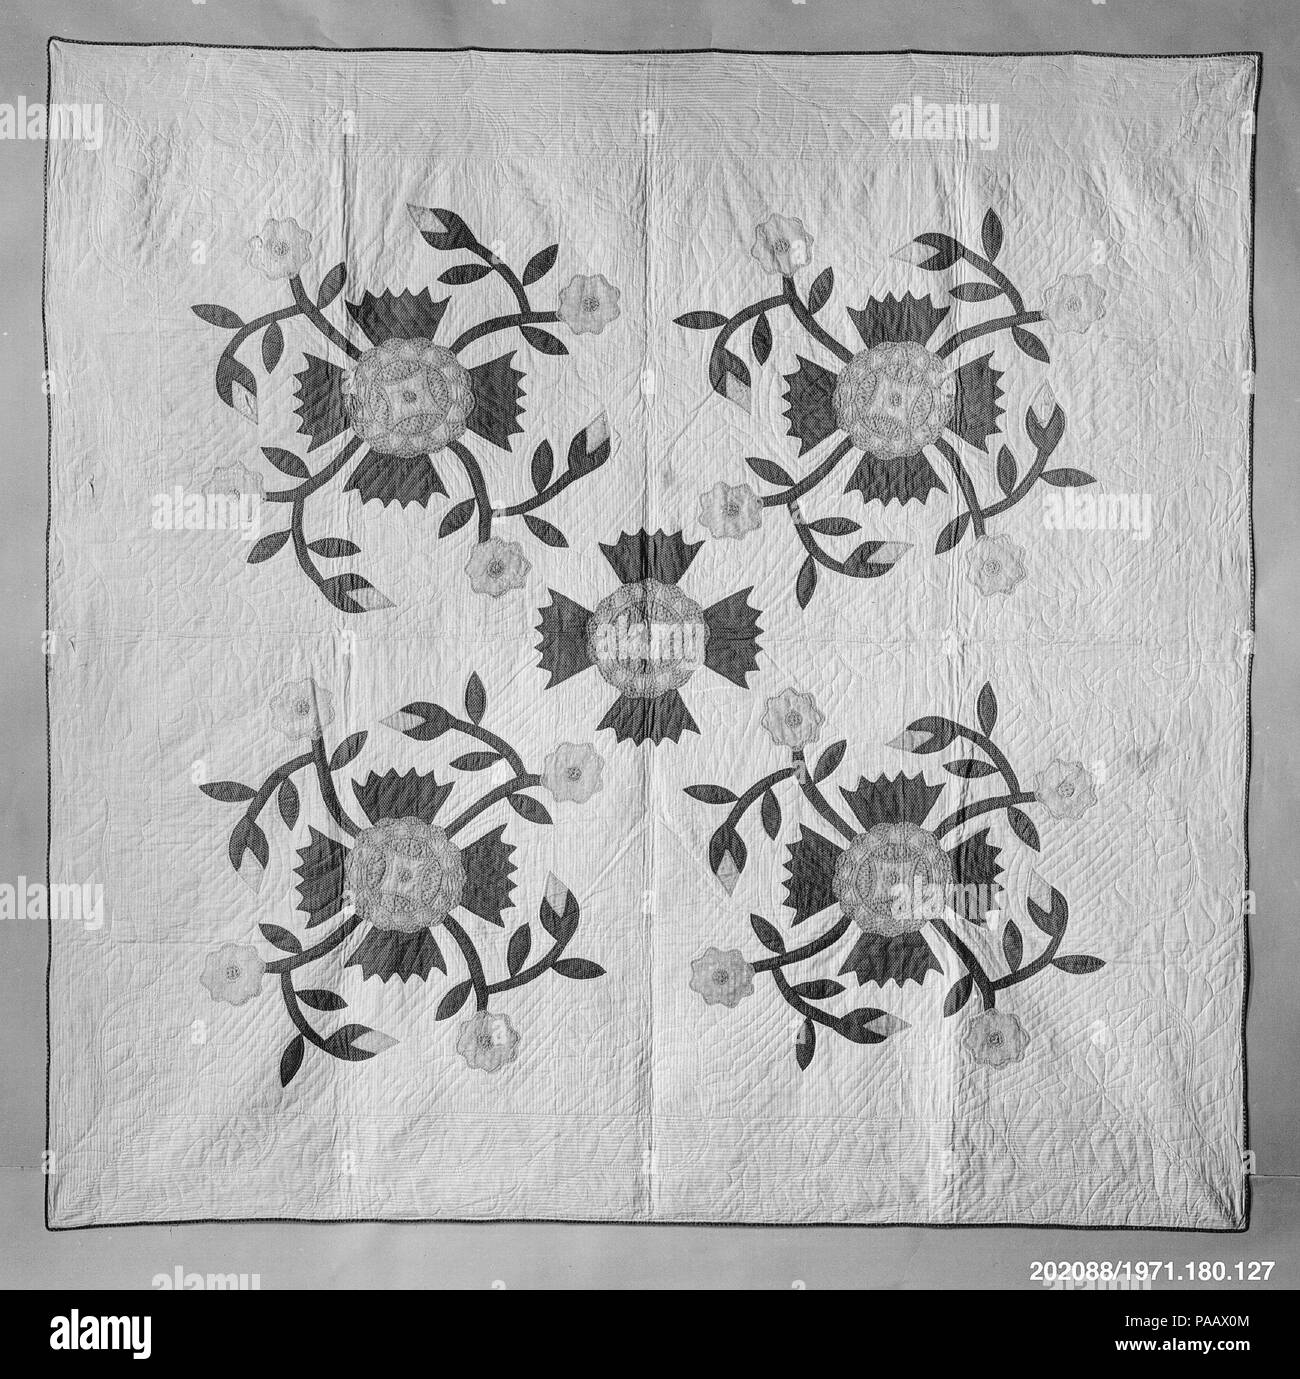 Quilt, Rose of Sharon pattern. Culture: American. Dimensions: 83 3/4 x 84 5/16 in. (212.7 x 214.2 cm). Date: ca. 1860.  The top of the quilt is of a white cotton fabric printed with a thin red stripe. The appliquéd flowers are of pink and green cotton. The edge binding is of green plaid cotton. White cotton fabric with a small dark red figure is used for the backing. There are large-scale quilted flower and feather forms in some areas, as well as an overall pattern of diagonal parallel lines. Museum: Metropolitan Museum of Art, New York, USA. Stock Photo